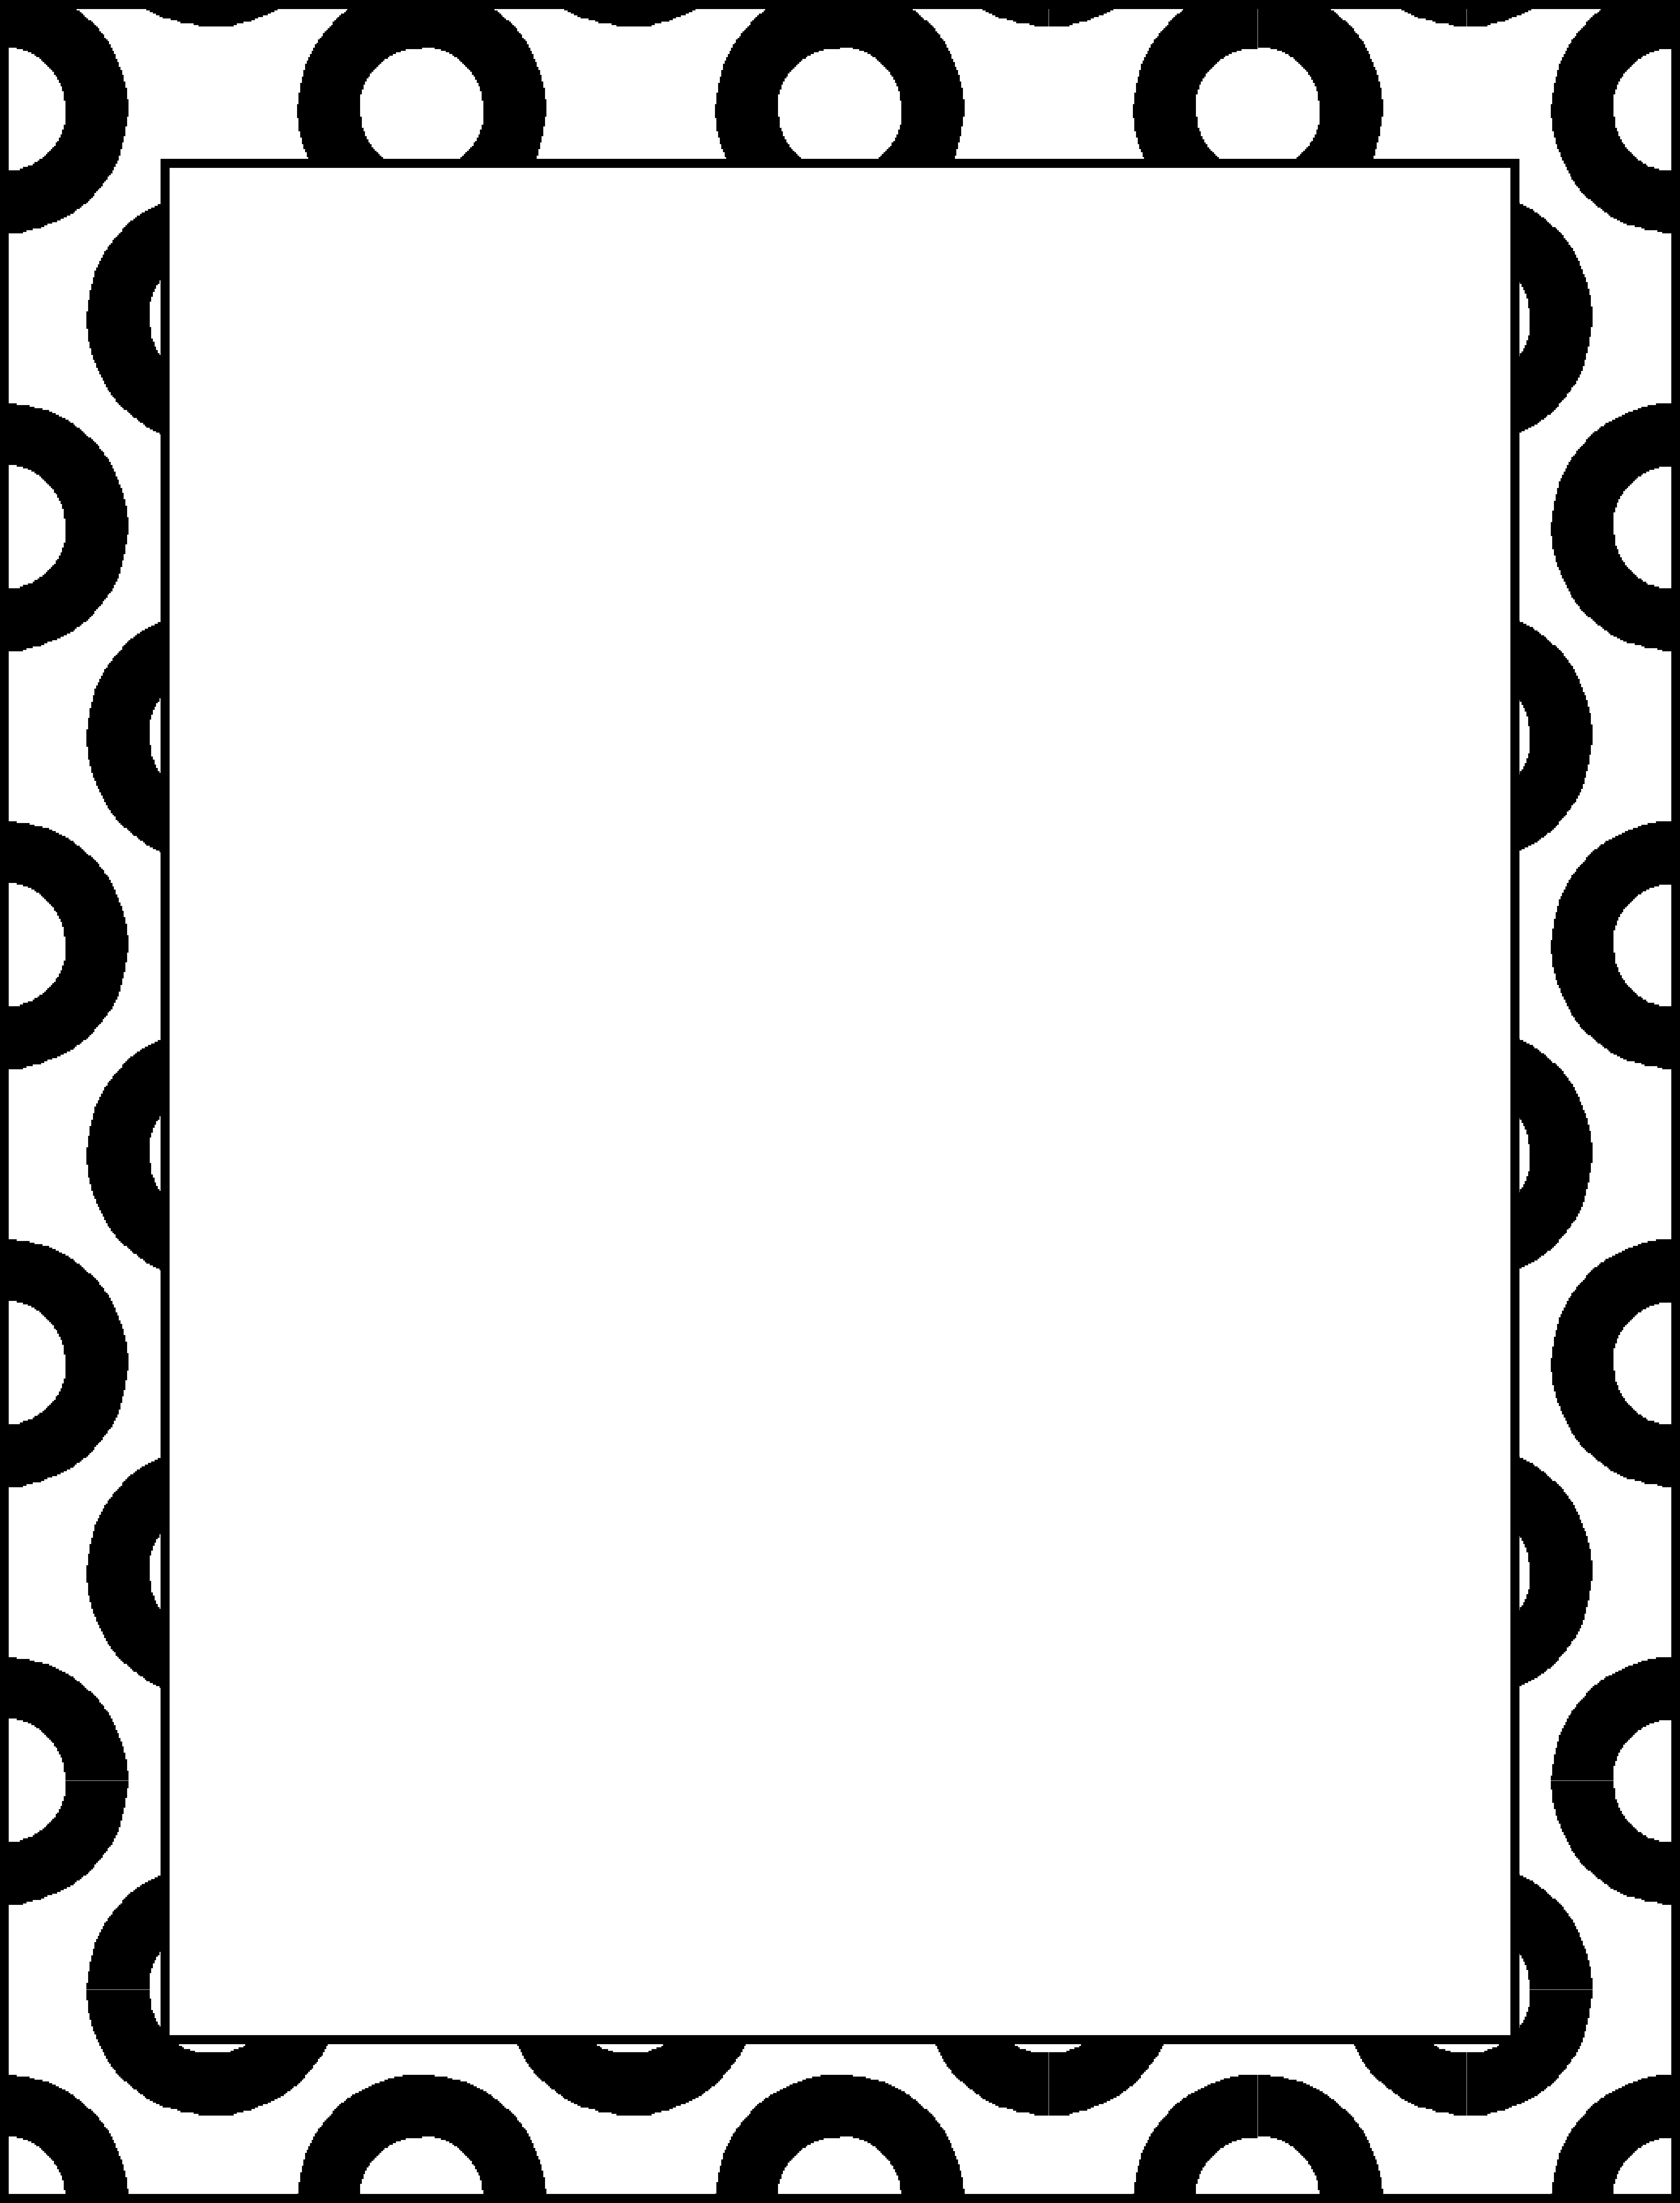 Line Border Designs For School Projects - ClipArt Best